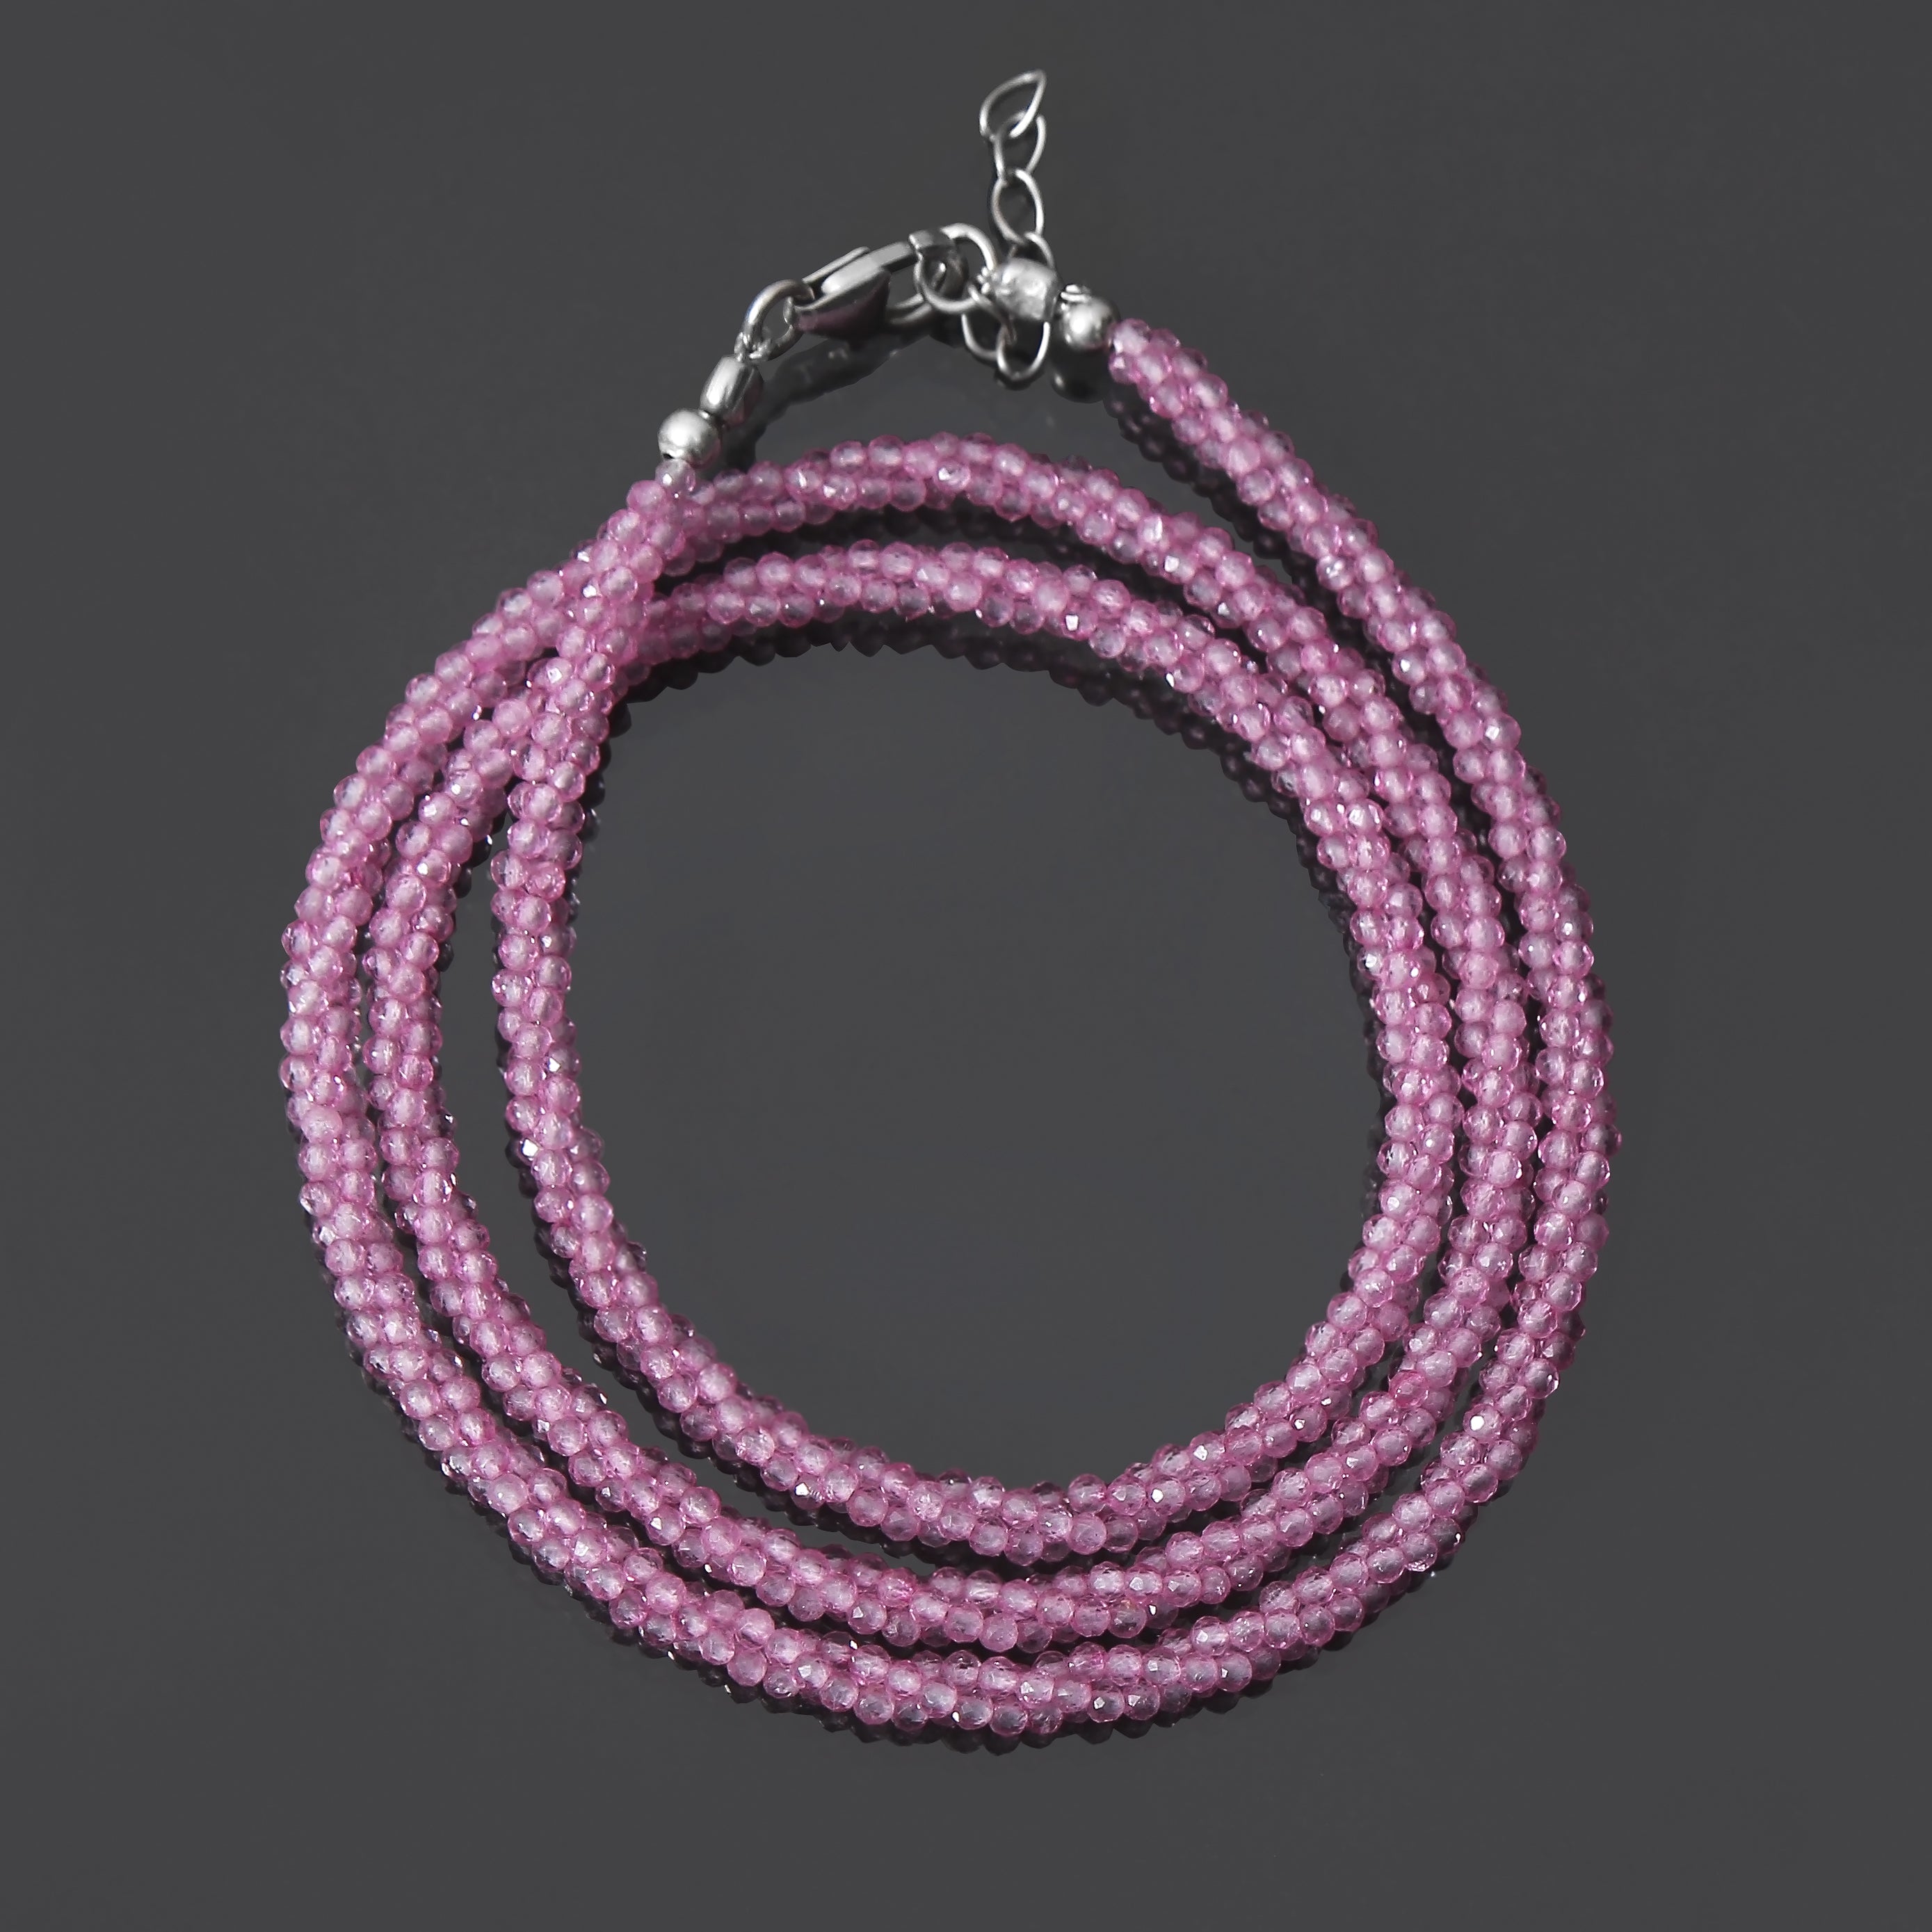 Buy Rhodochrosite Bead Necklace In Sterling Silver, Silver Bead Necklace,  Beaded Jewelry Gifts For Women (18 Inches) 250.00 ctw at ShopLC.